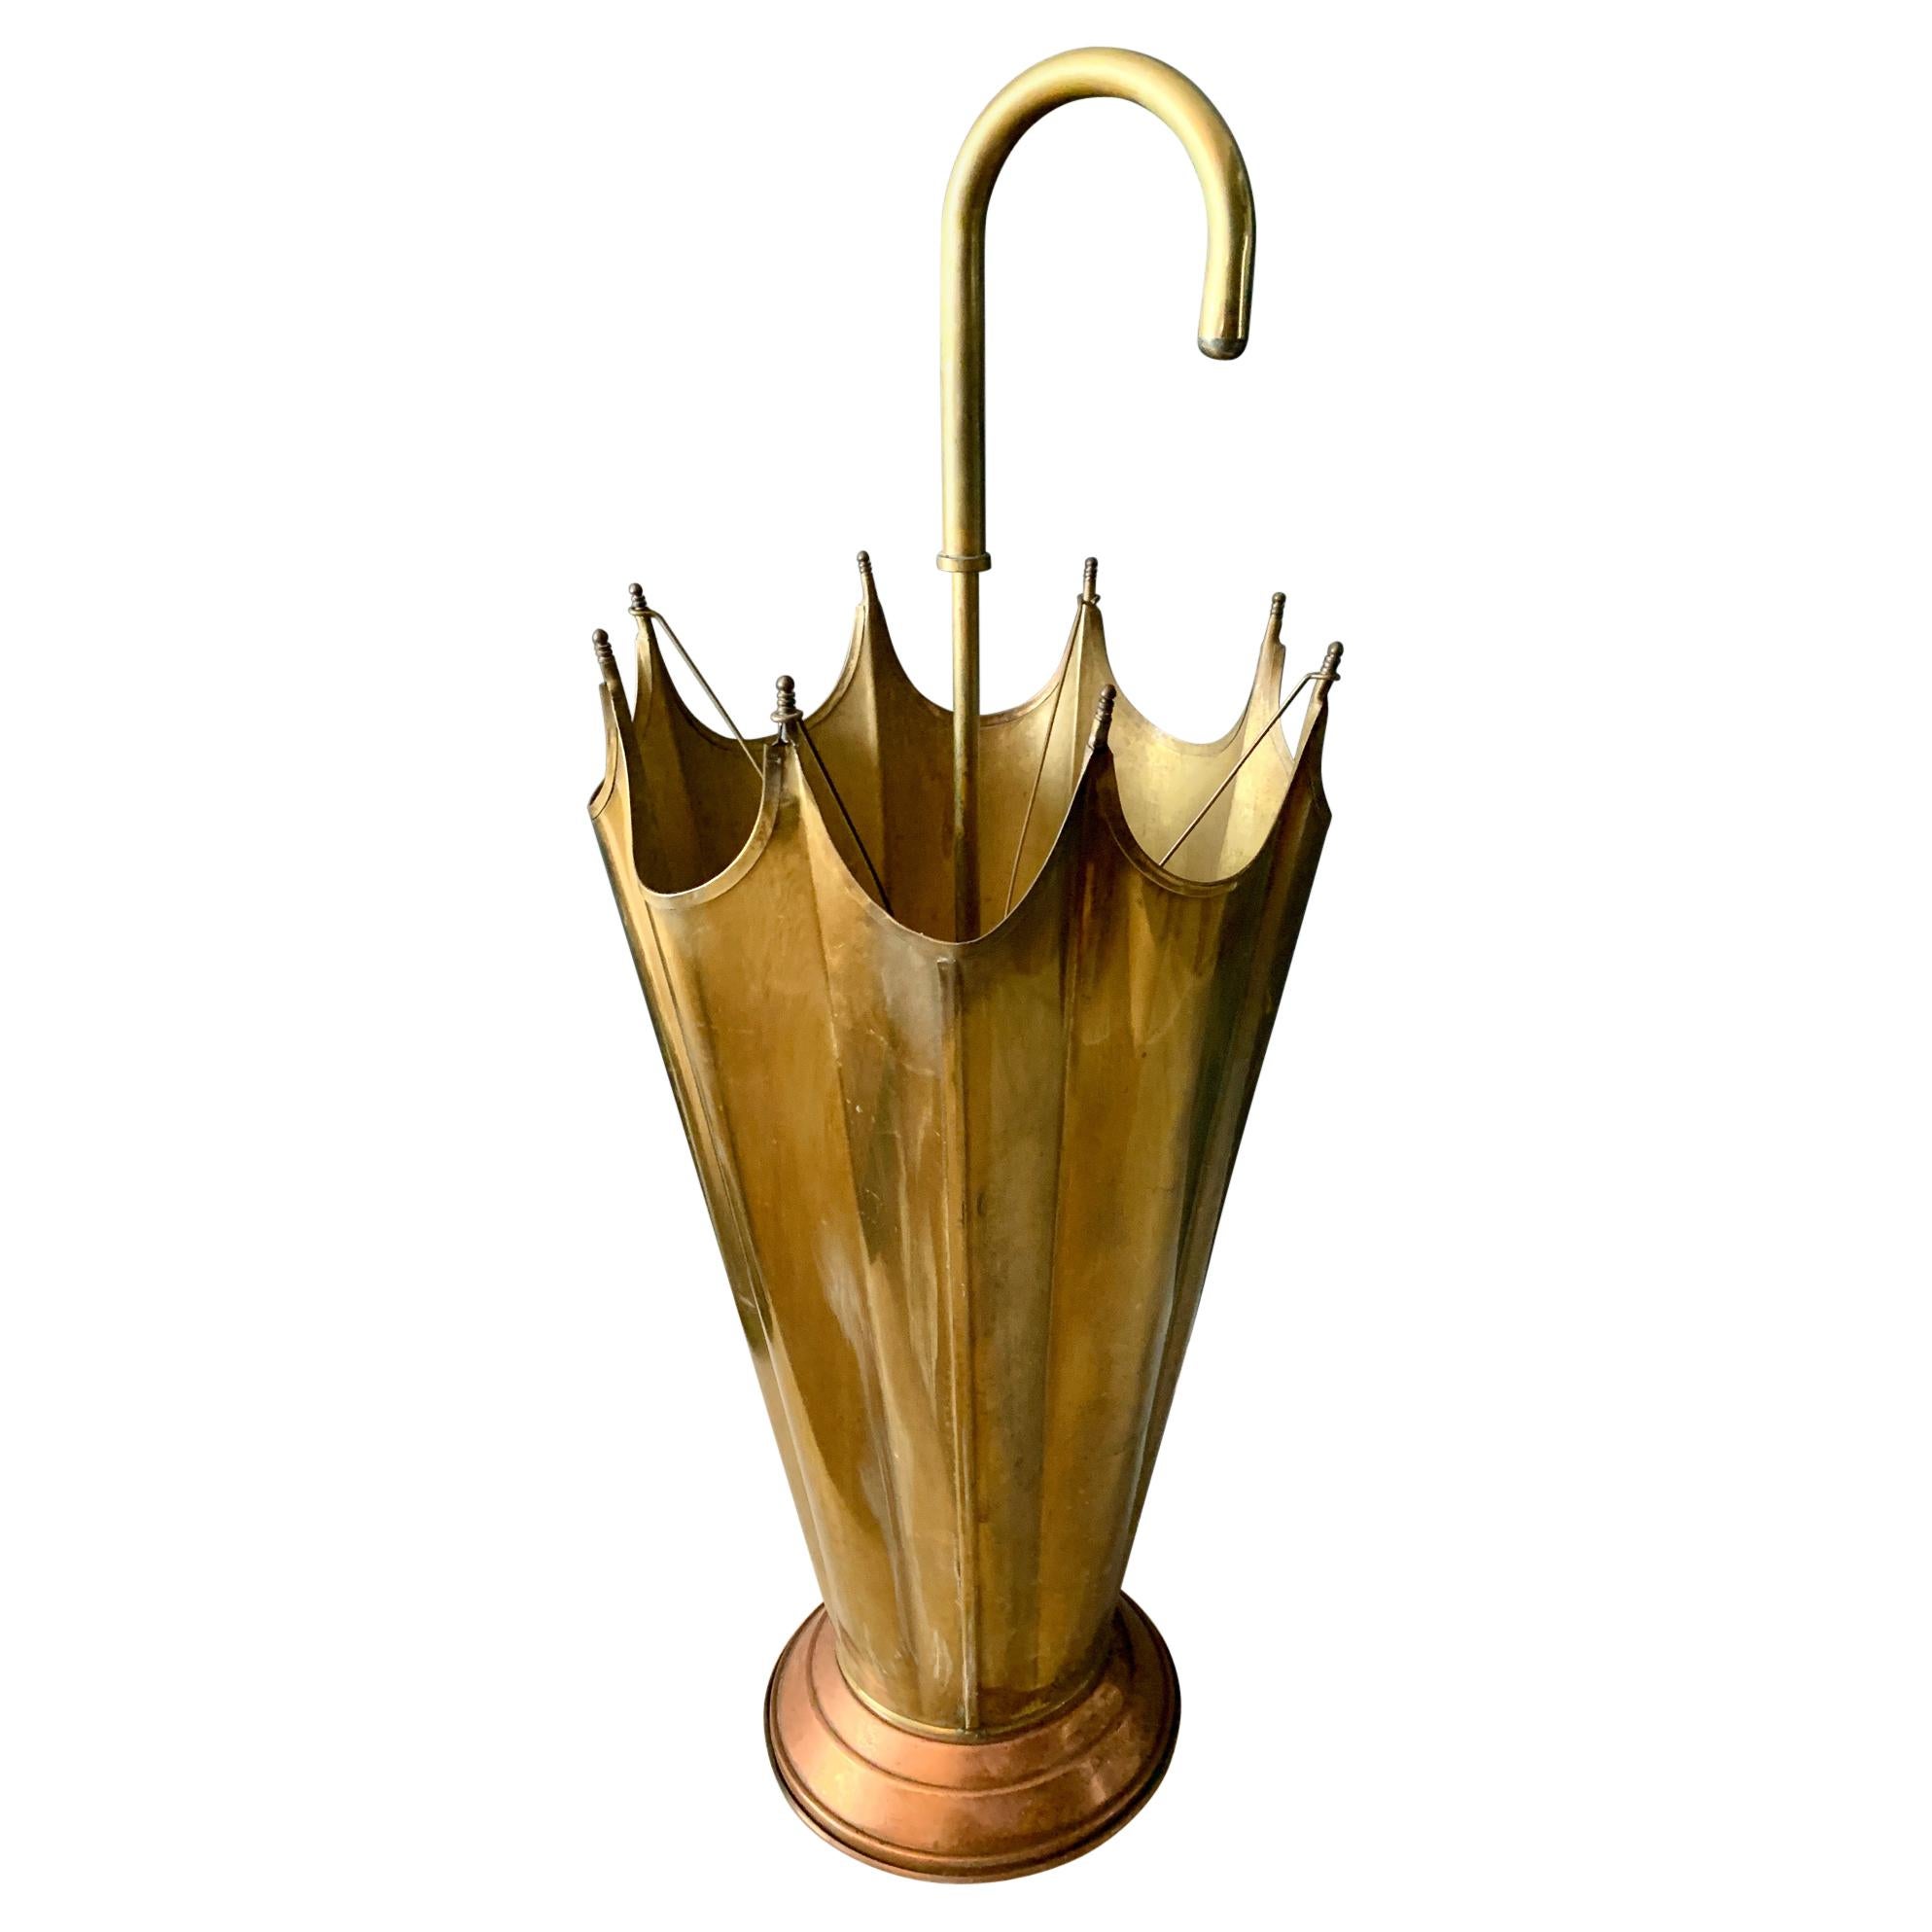 Vintage French Brass Umbrella Stand with Copper Base